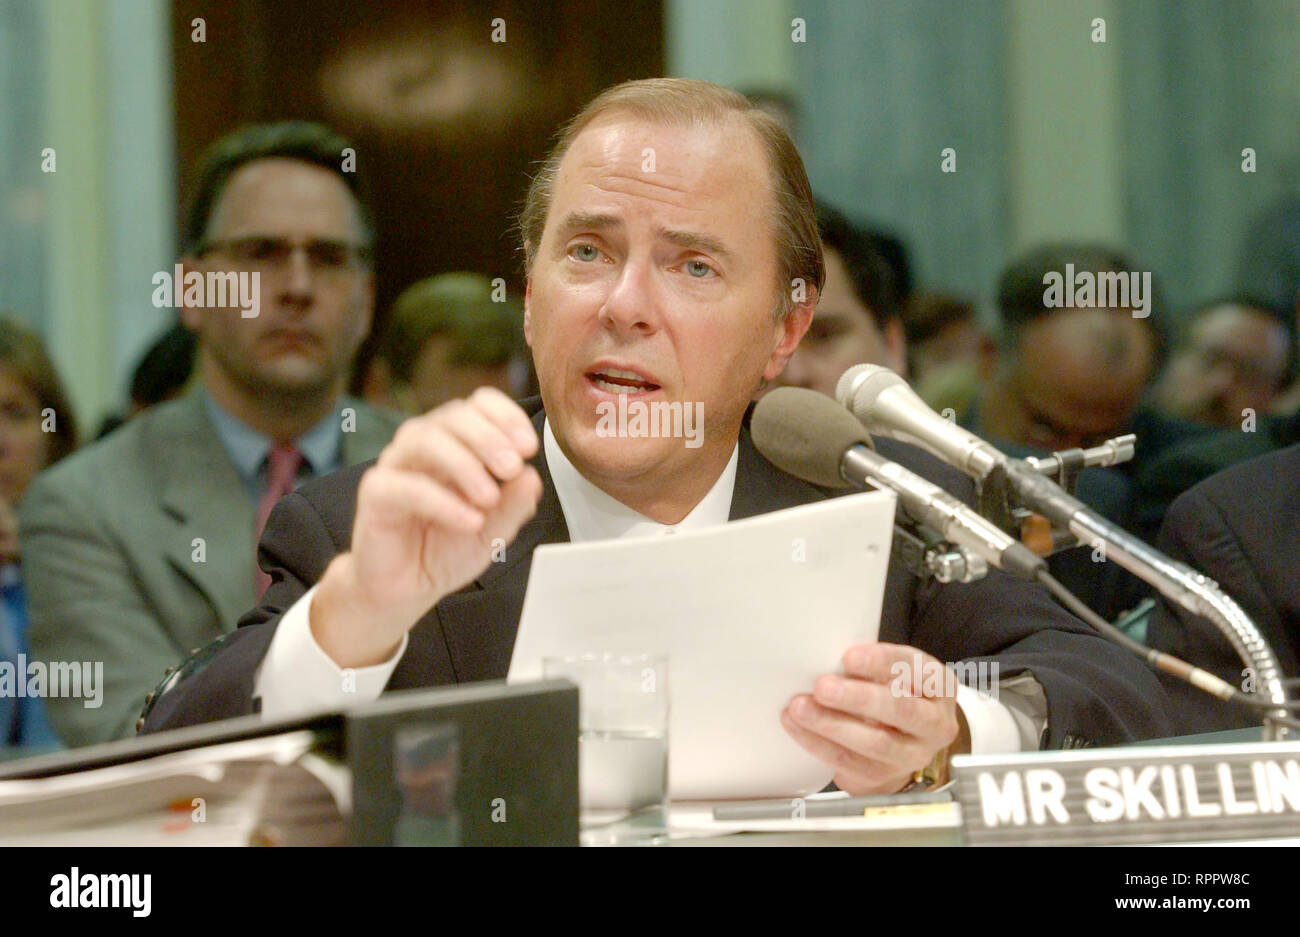 Washington, District of Columbia, USA. 18th Oct, 2009. Washington, DC - February 26, 2002 -- Testimony of Jeffrey Skilling, former President and CEO, Enron Corporation, before the U.S. Senate Commerce, Science and Transportation Committee to examine certain issues with respect to the collapse of Enron Corporation Credit: Ron Sachs/CNP/ZUMA Wire/Alamy Live News Stock Photo